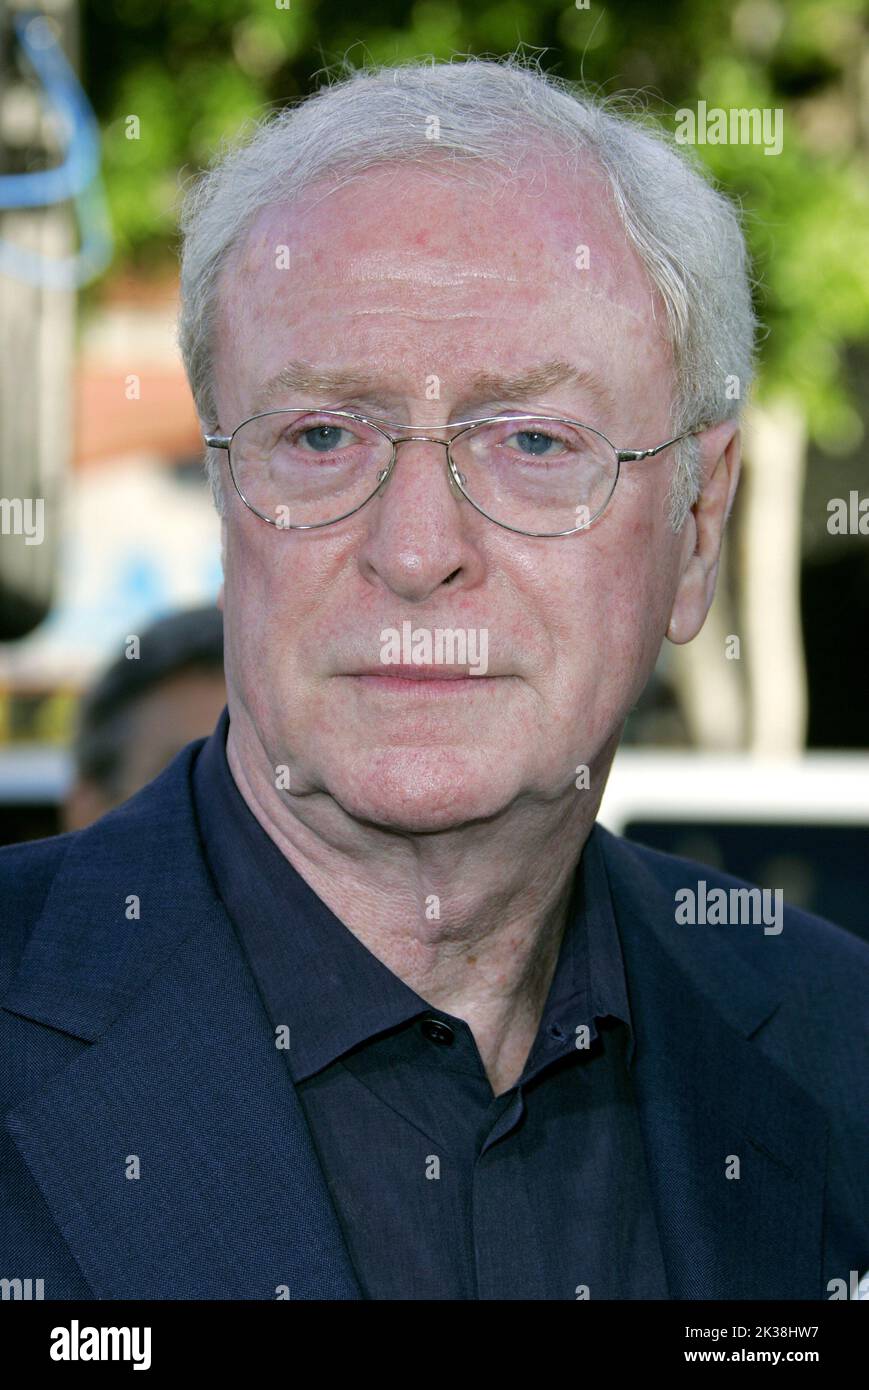 SIR MICHAEL CAINE ACTOR BATMAN BEGINS CHINESE THEATRE, HOLLYWOOD LOS ANGELES, USA 06/06/2005 LAM51611 Stock Photo